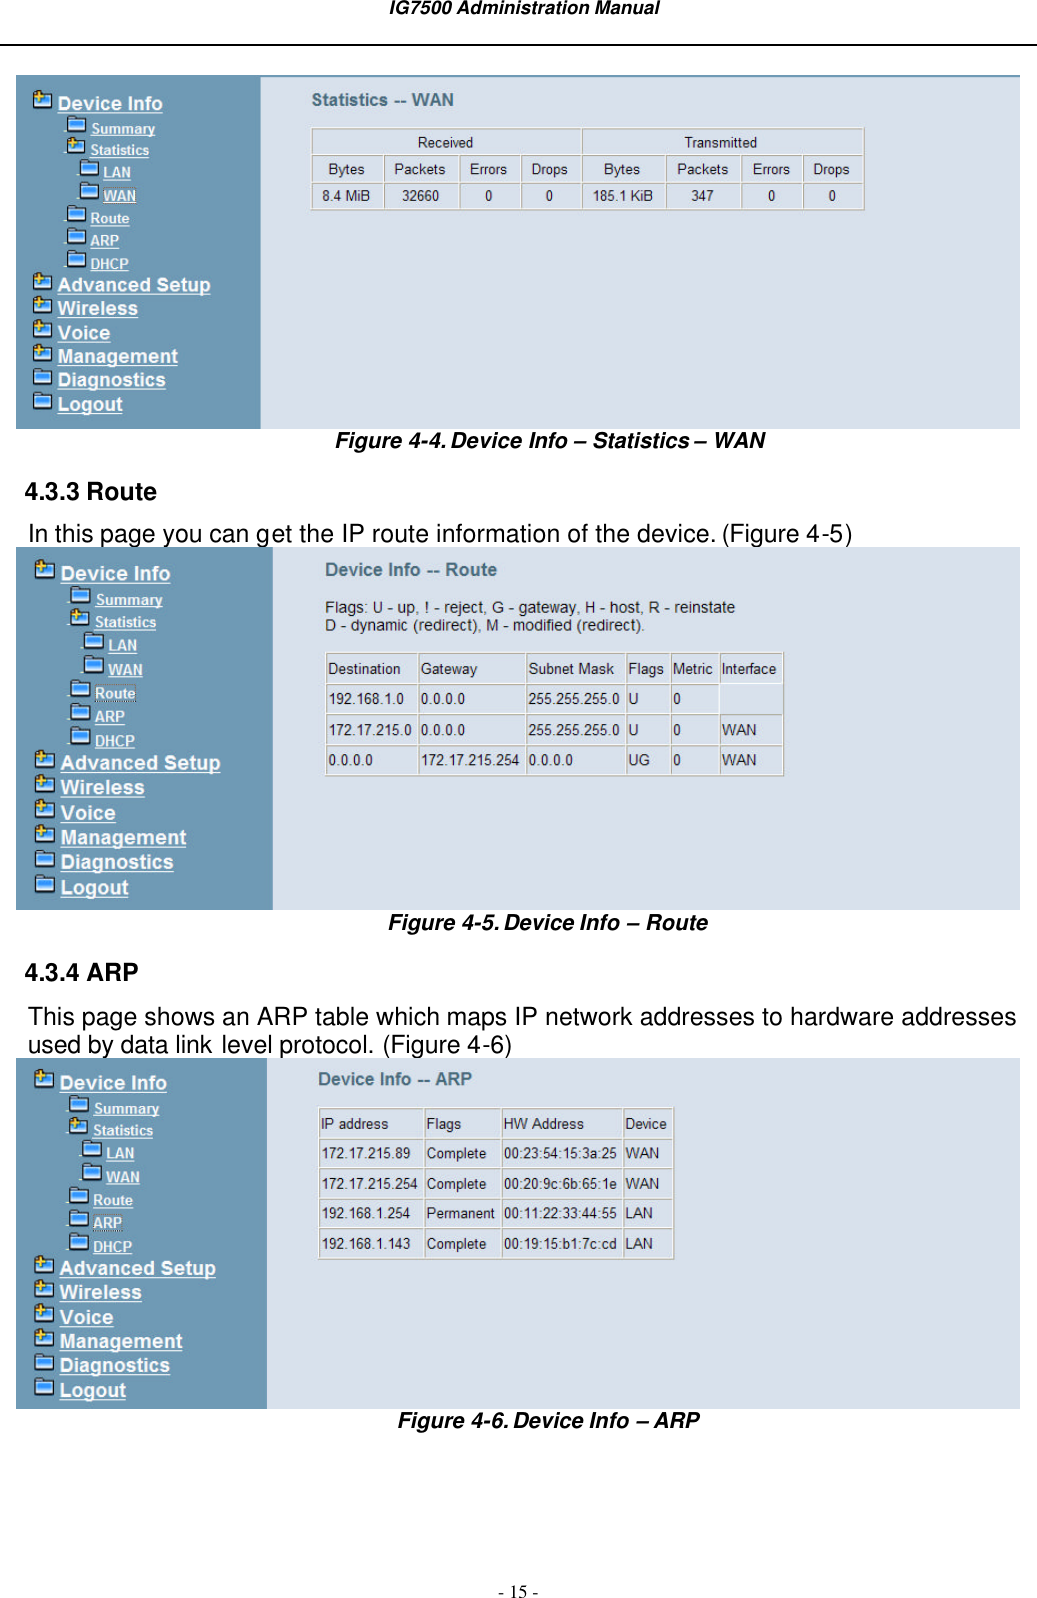  IG7500 Administration Manual  - 15 -  Figure 4-4. Device Info – Statistics – WAN 4.3.3 Route In this page you can get the IP route information of the device. (Figure 4-5)  Figure 4-5. Device Info – Route 4.3.4 ARP This page shows an ARP table which maps IP network addresses to hardware addresses used by data link level protocol. (Figure 4-6)  Figure 4-6. Device Info – ARP 